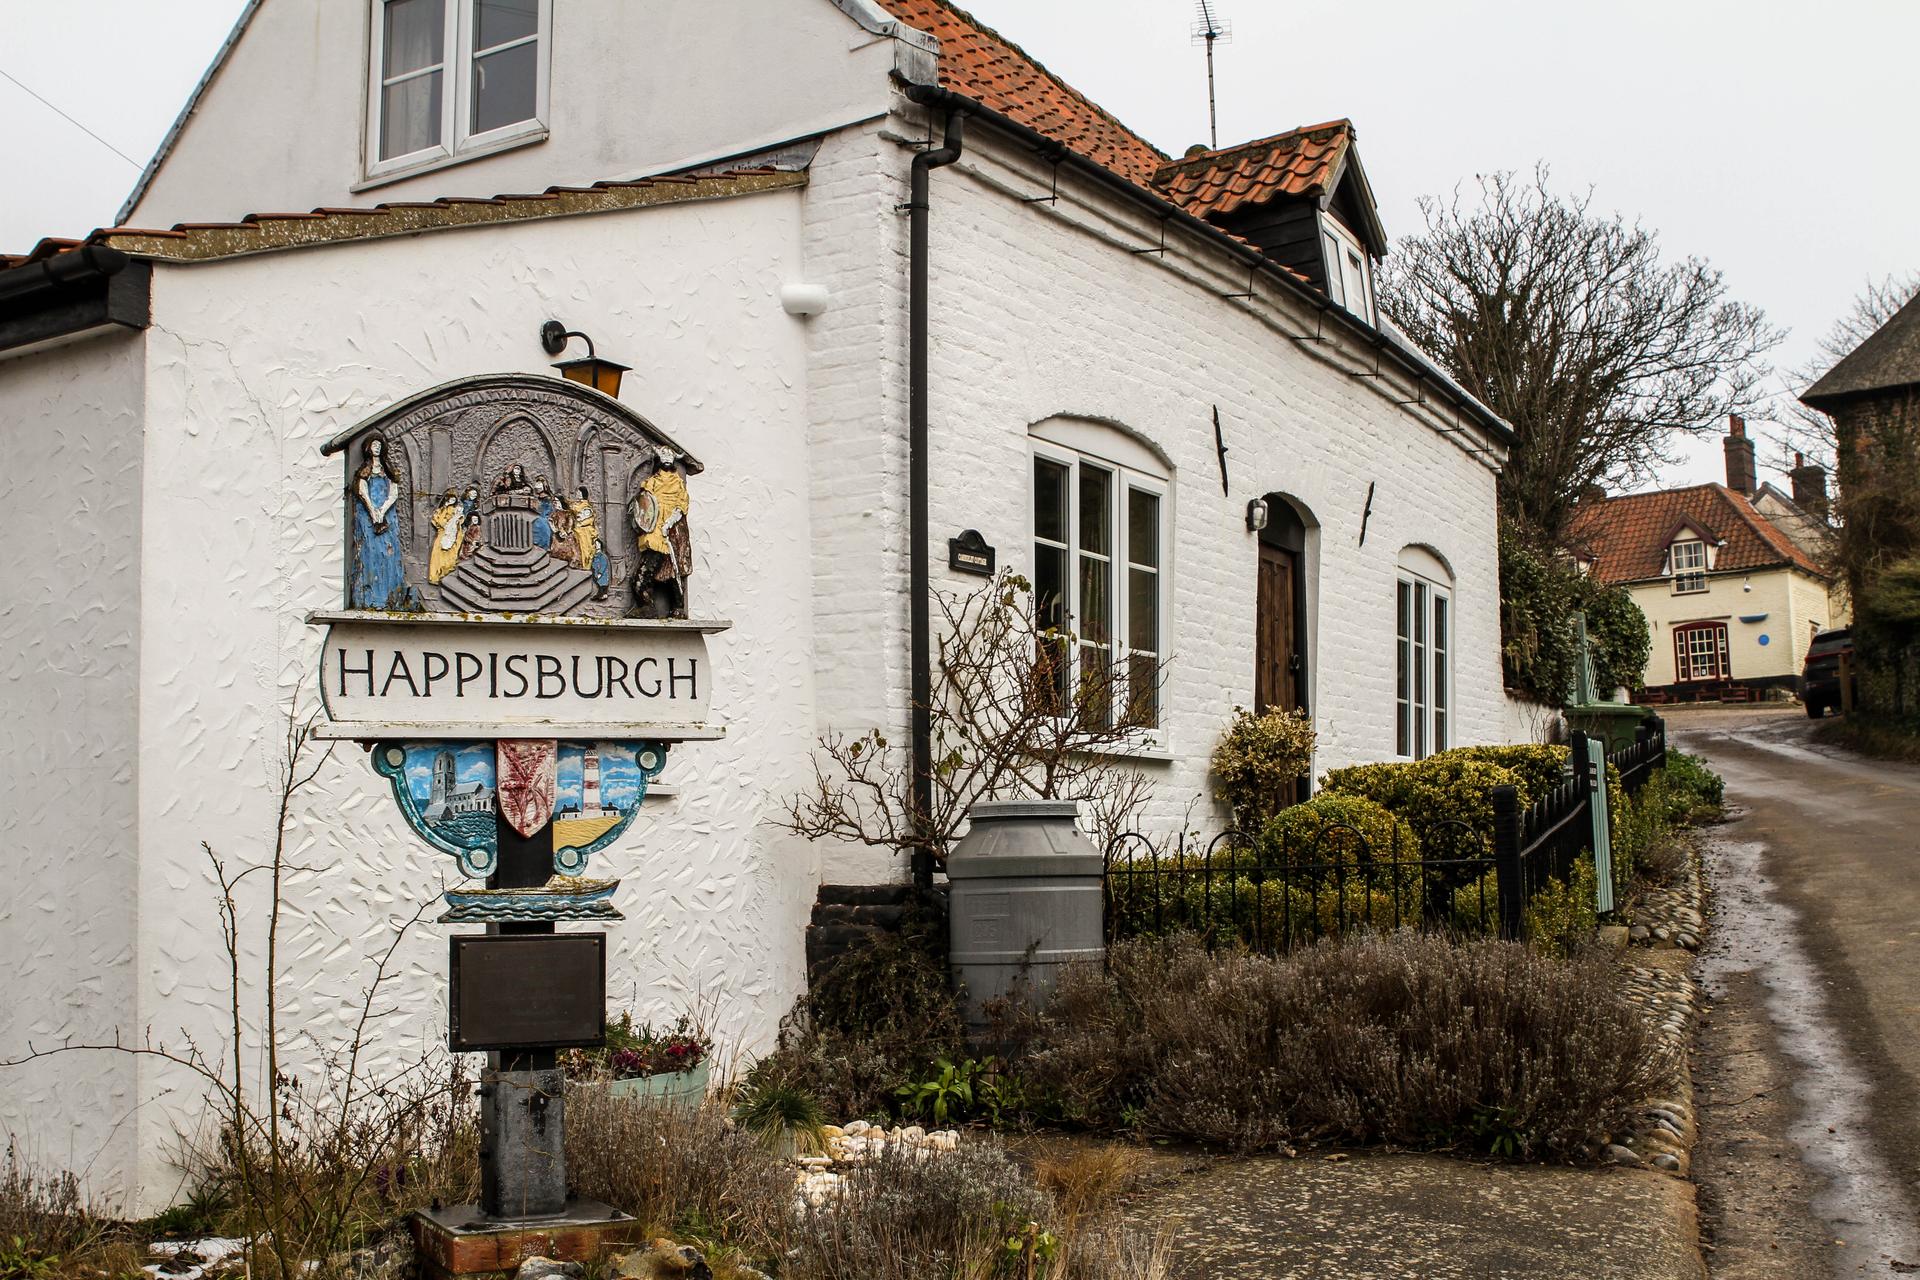 A sign in historic Happisburgh